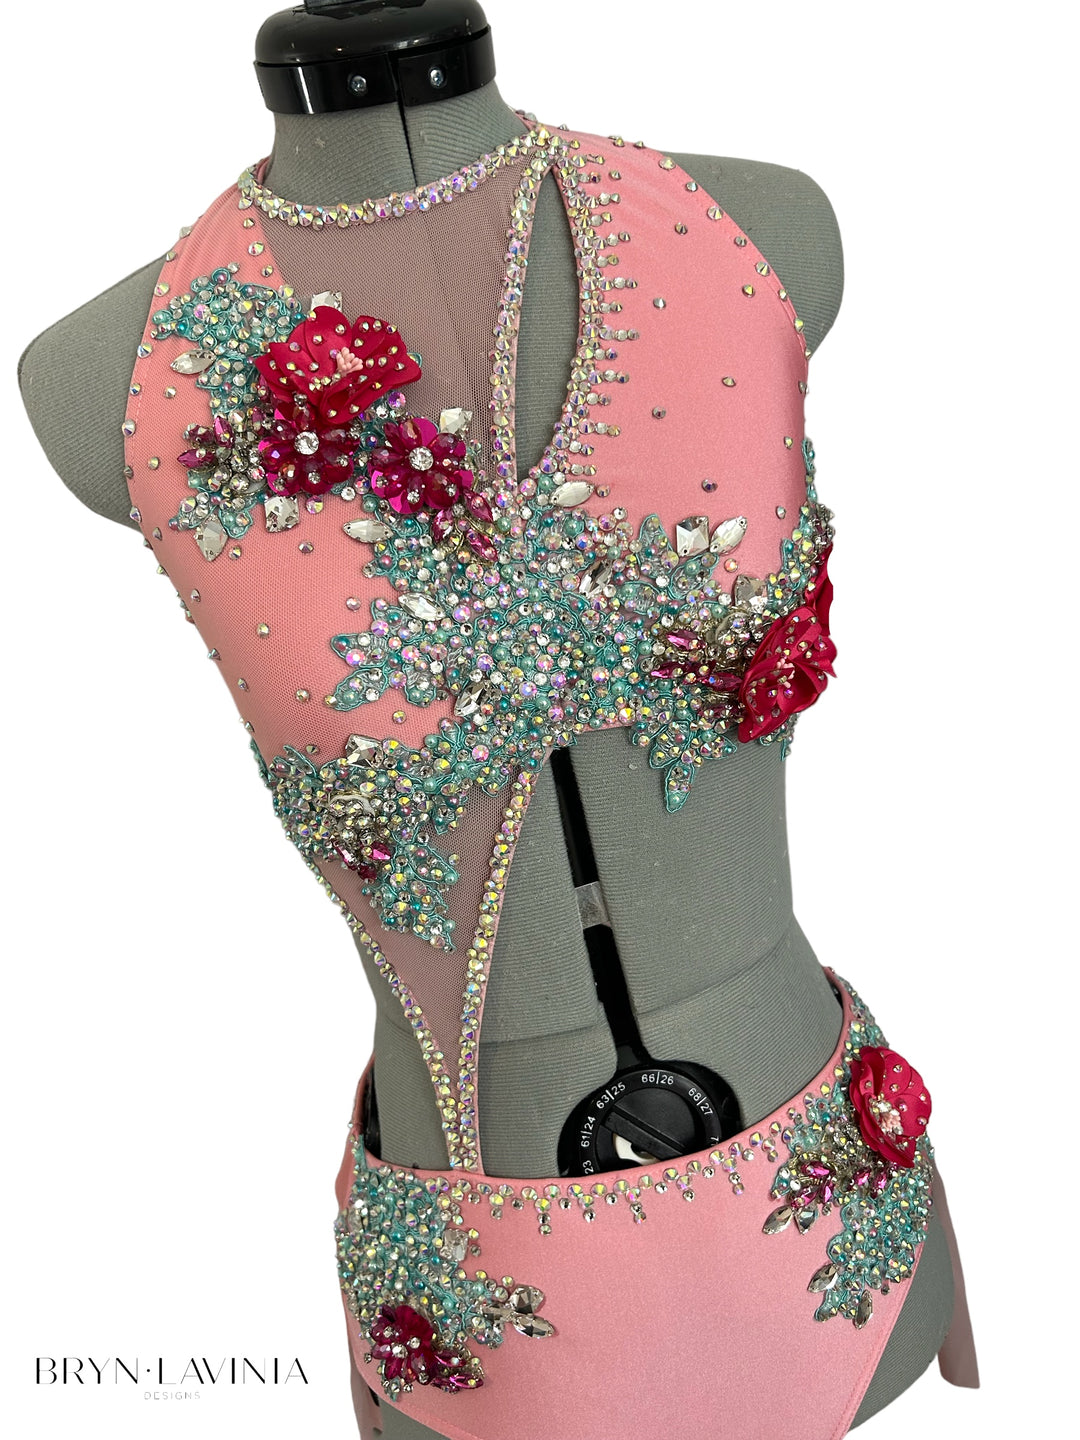 NEW Adult XS/Small bubblegum pink ready to ship costume